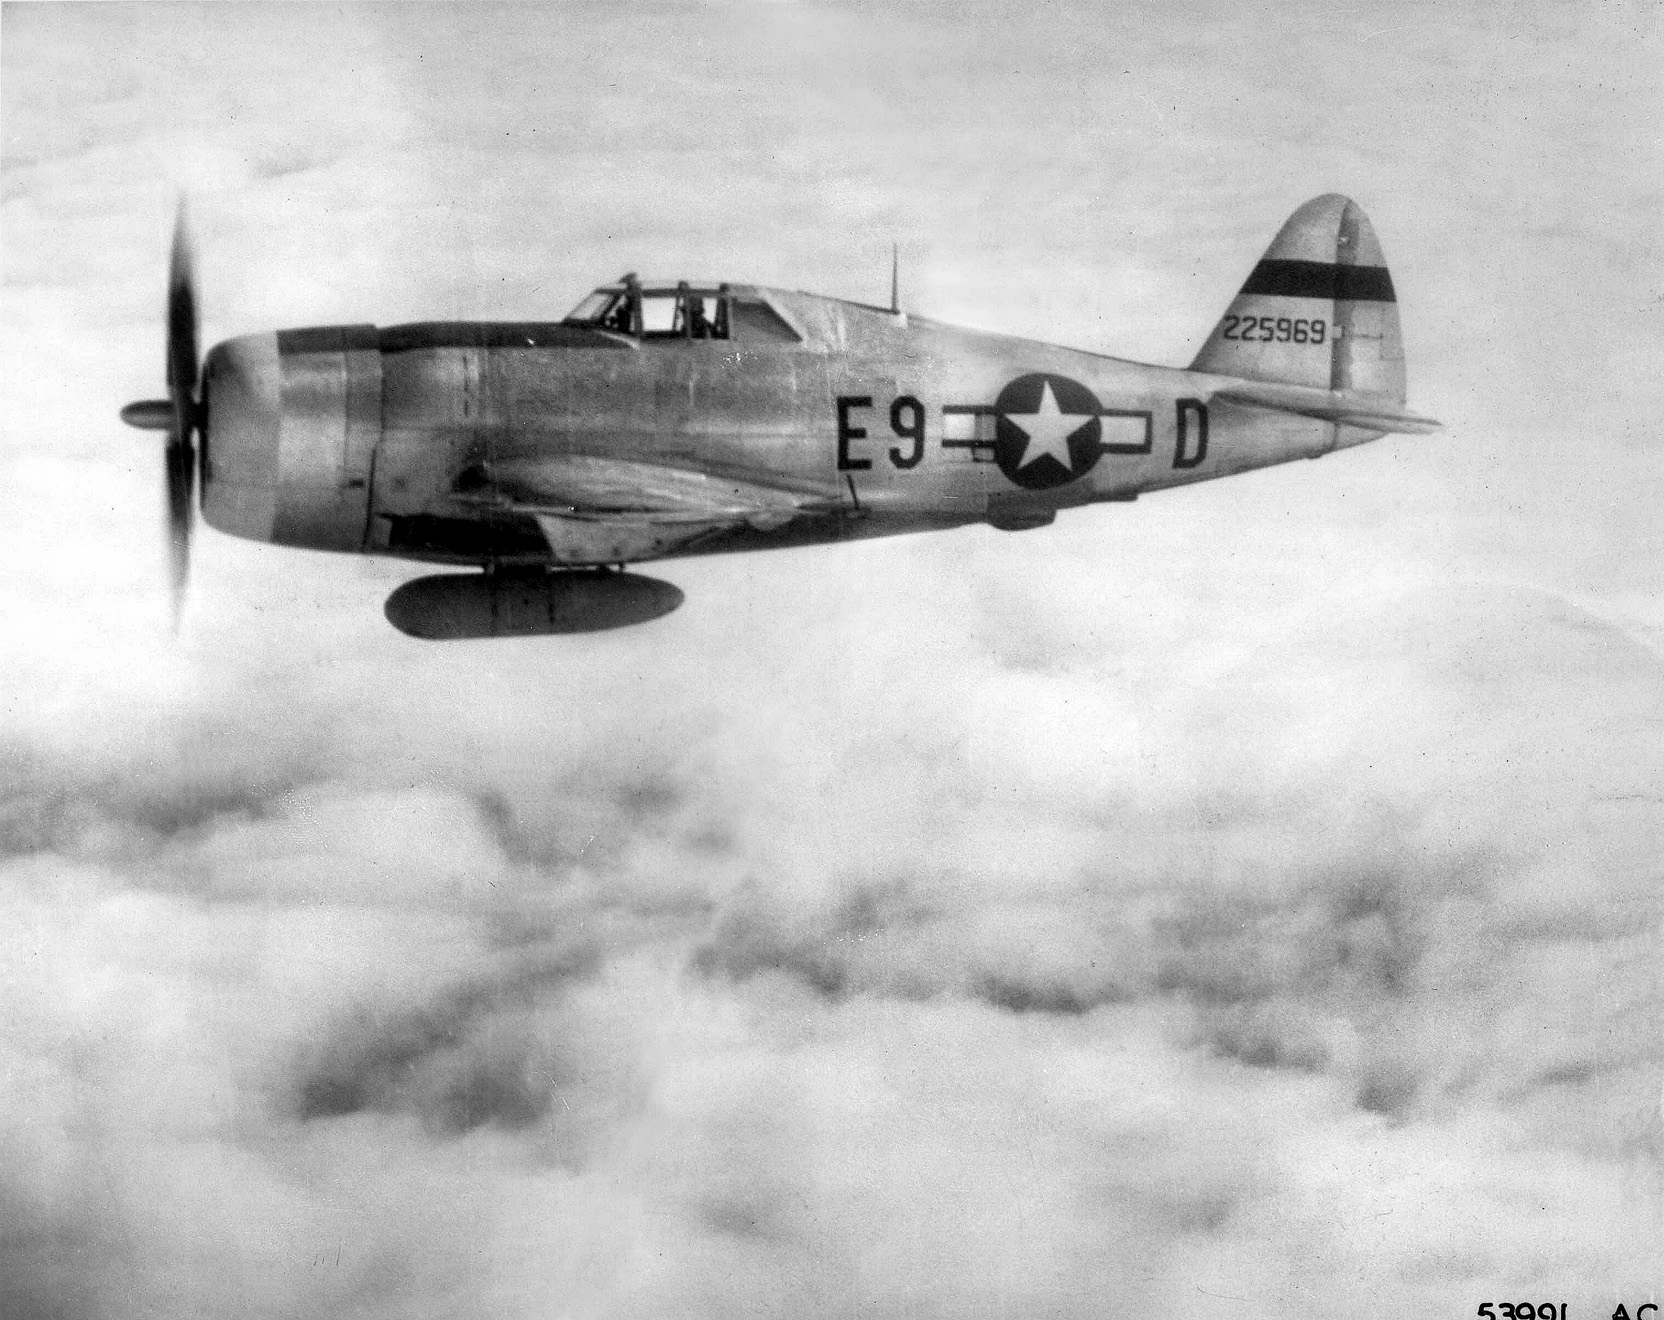  This P-47 was originally assigned to the 56th Fighter Group of the U.S. Eighth Air Force in Europe. It was flown by Lieutenant Roach Stewart, Jr., until it was lost in August 1944.